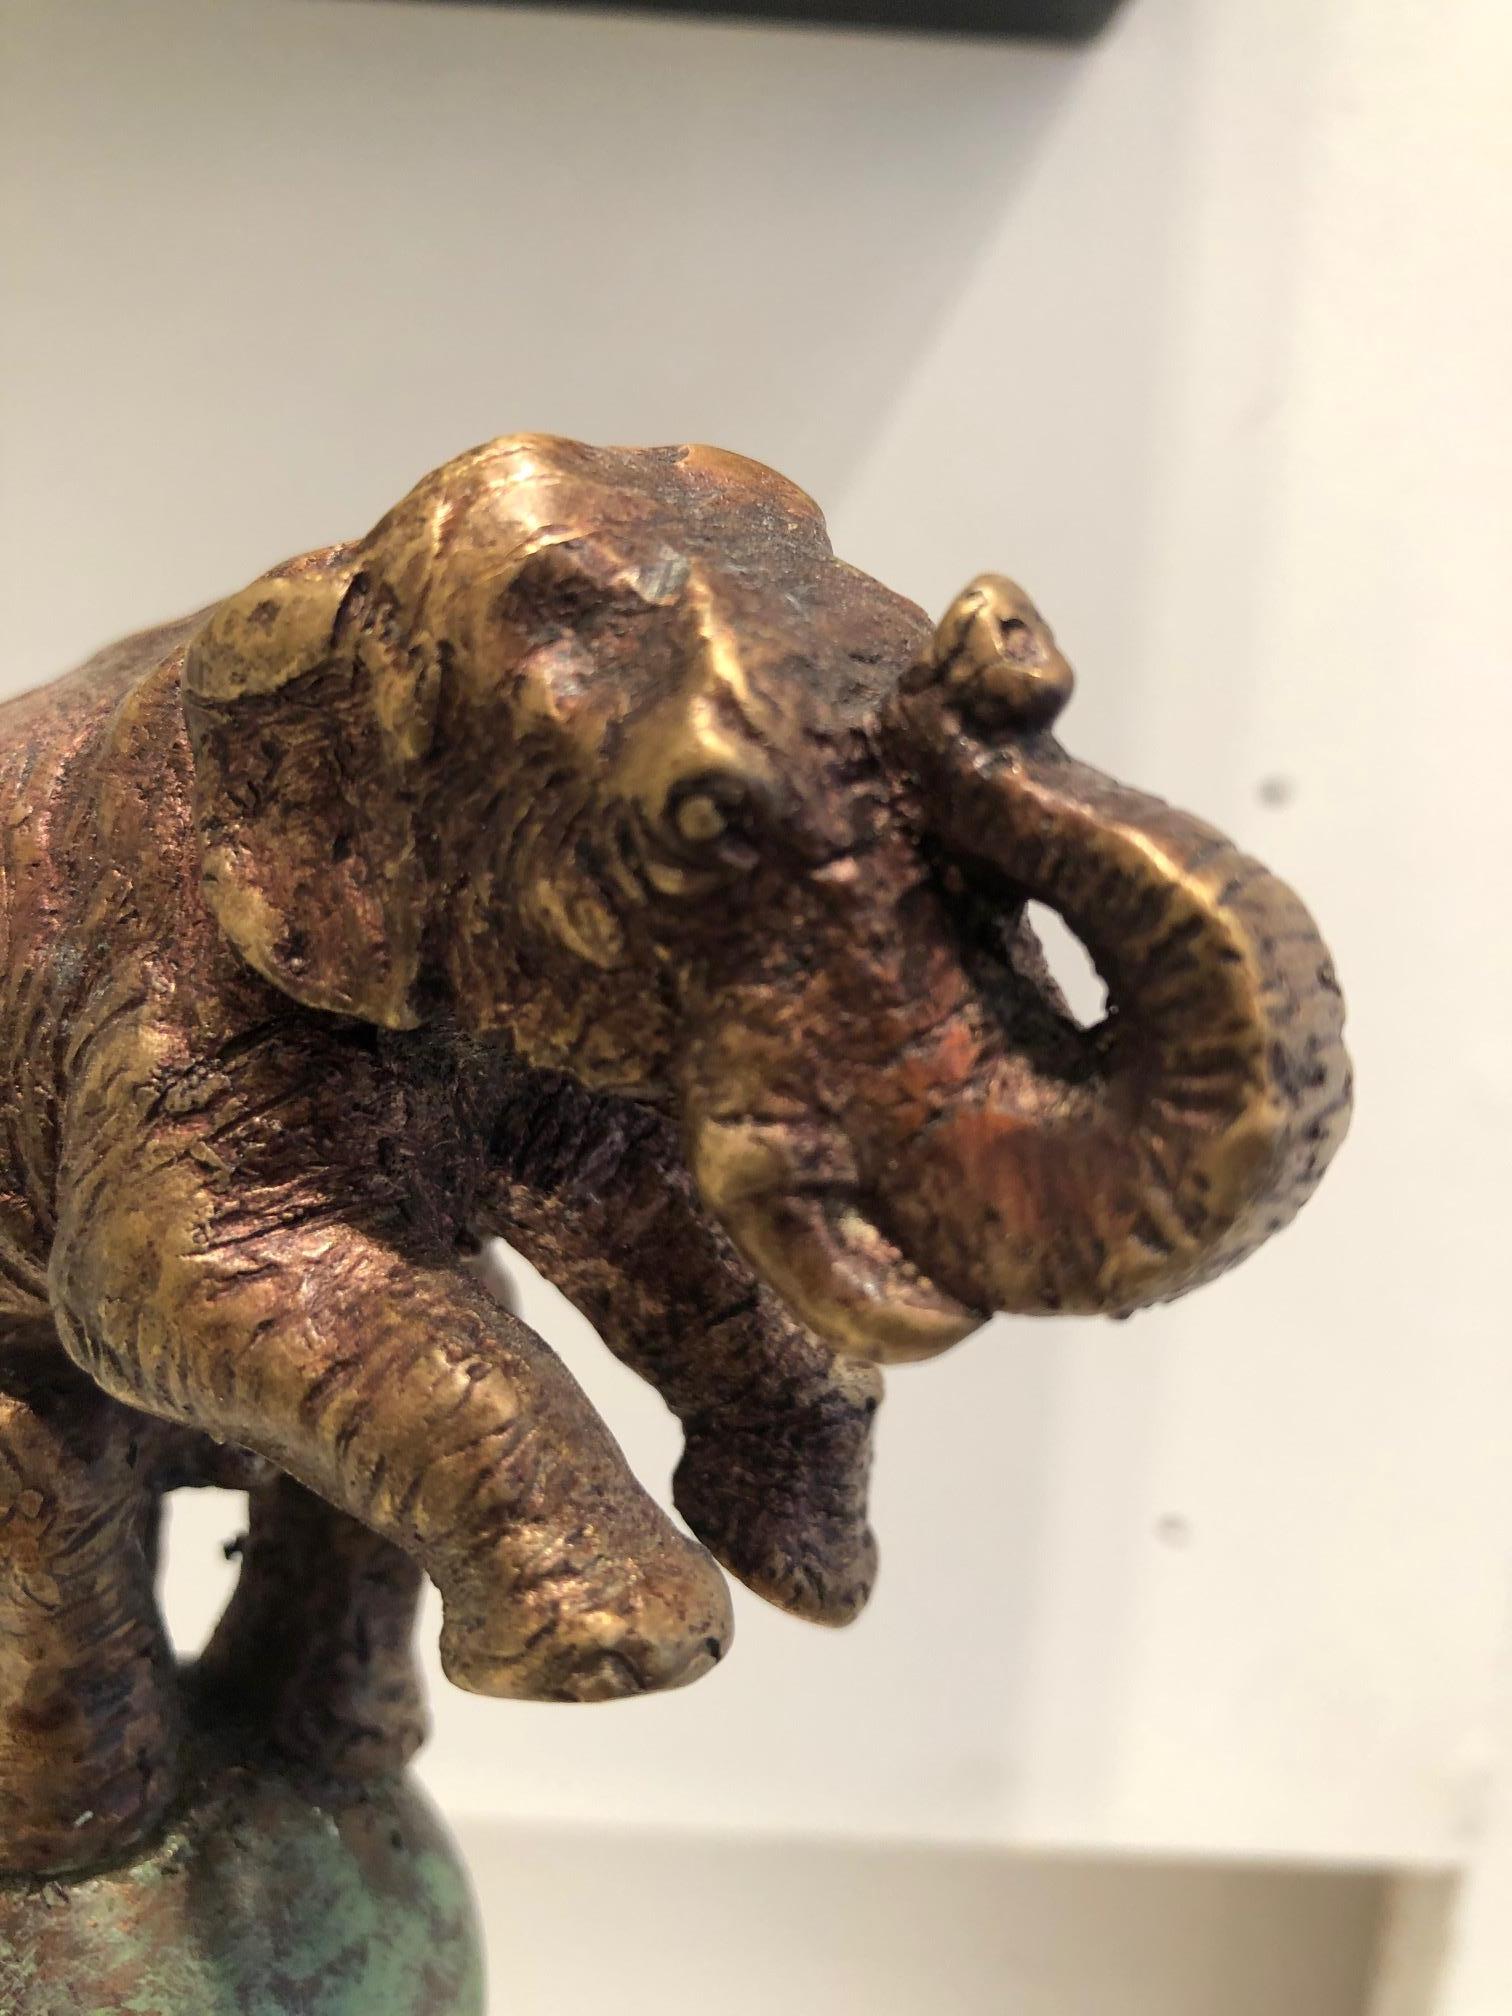 Elefant on Ball  bronze figurative animal sculpture of circus scene by Rolf Knie - Sculpture by Rolf Knie 